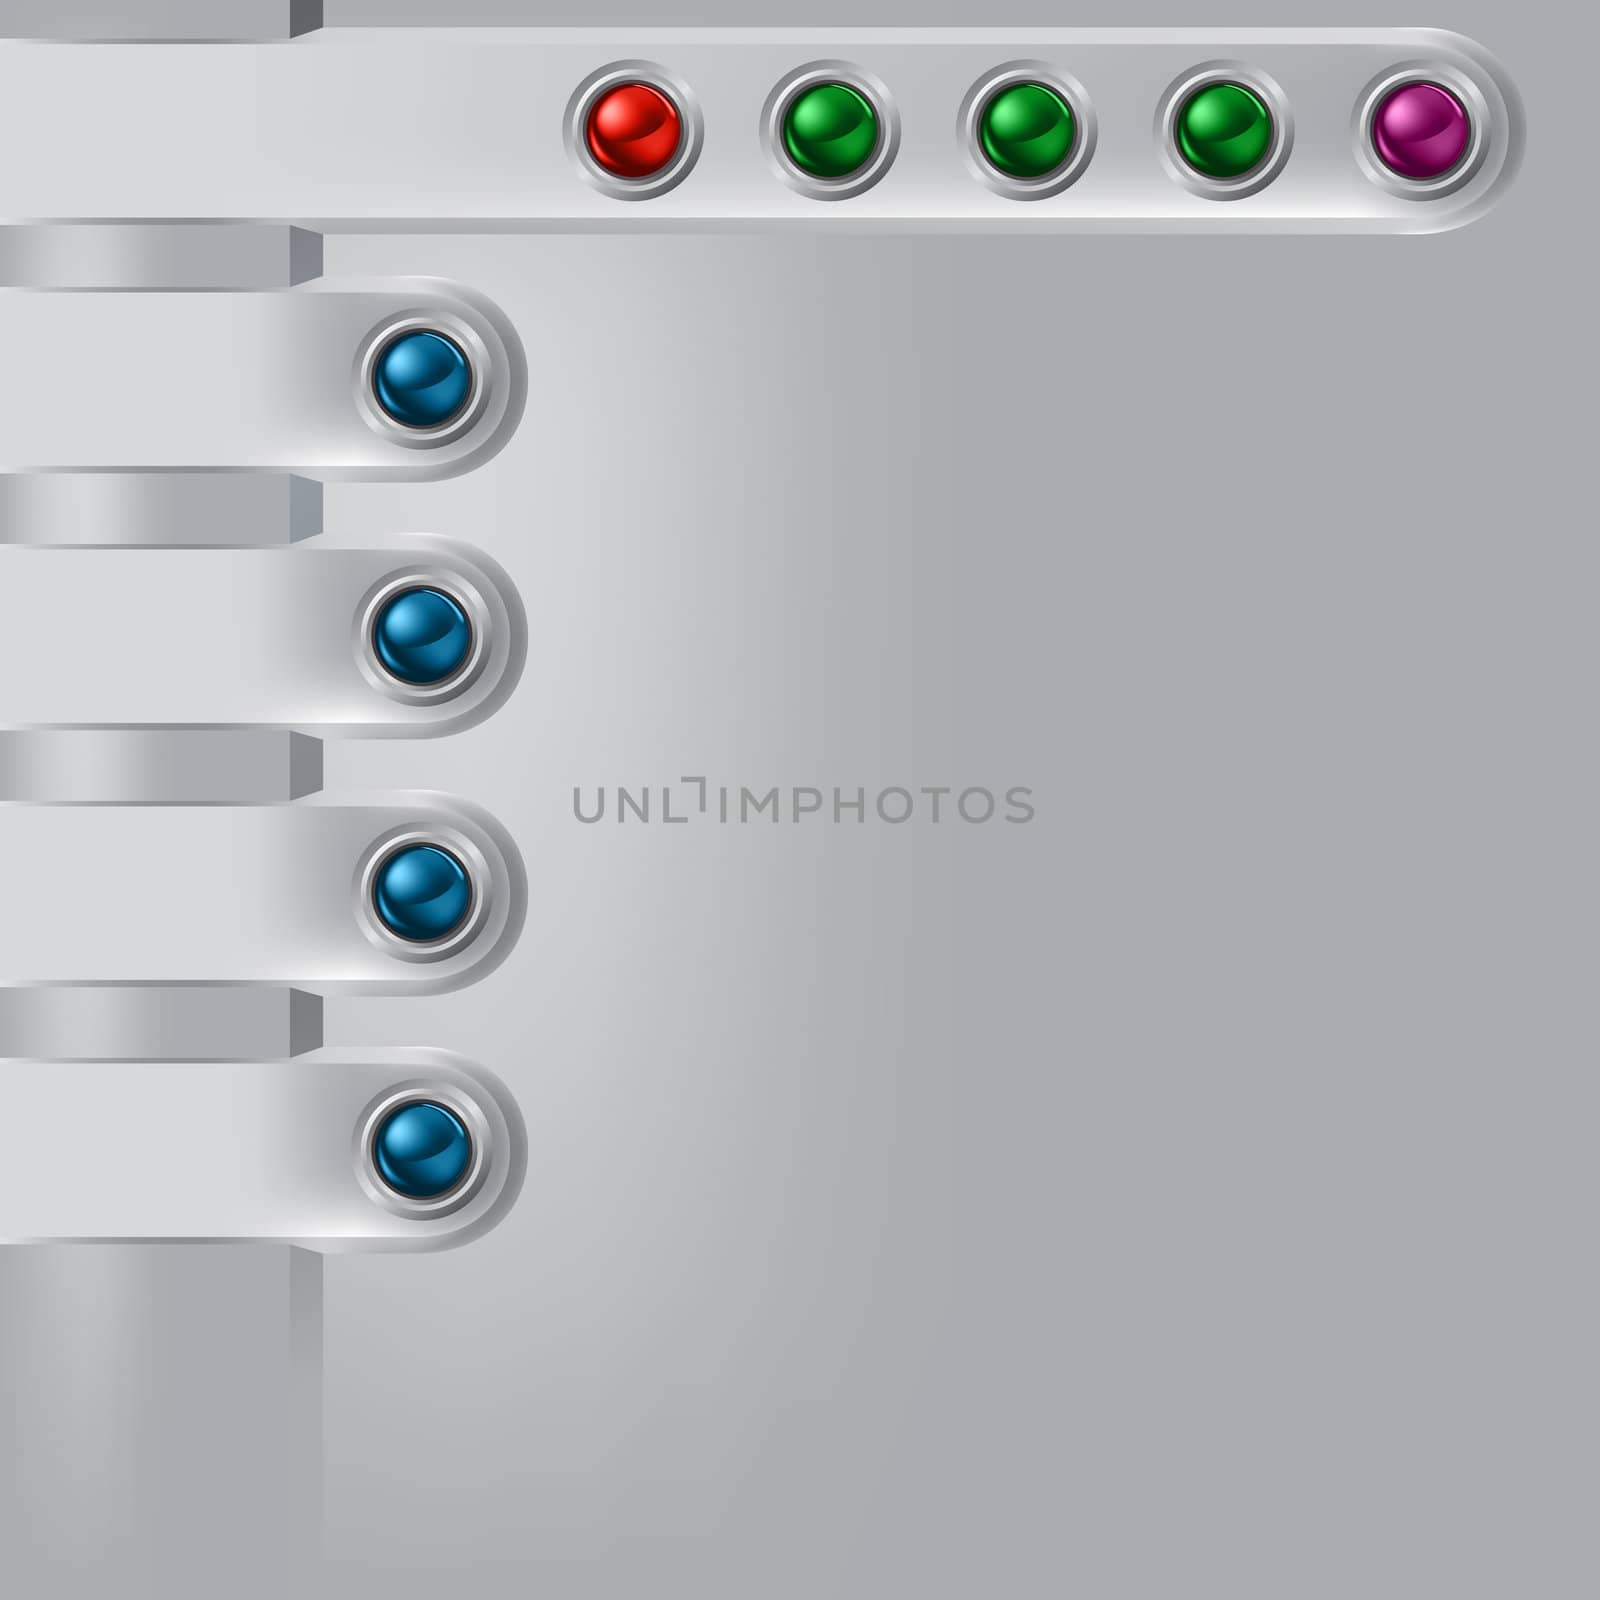 abstract layout with color buttons on silver background